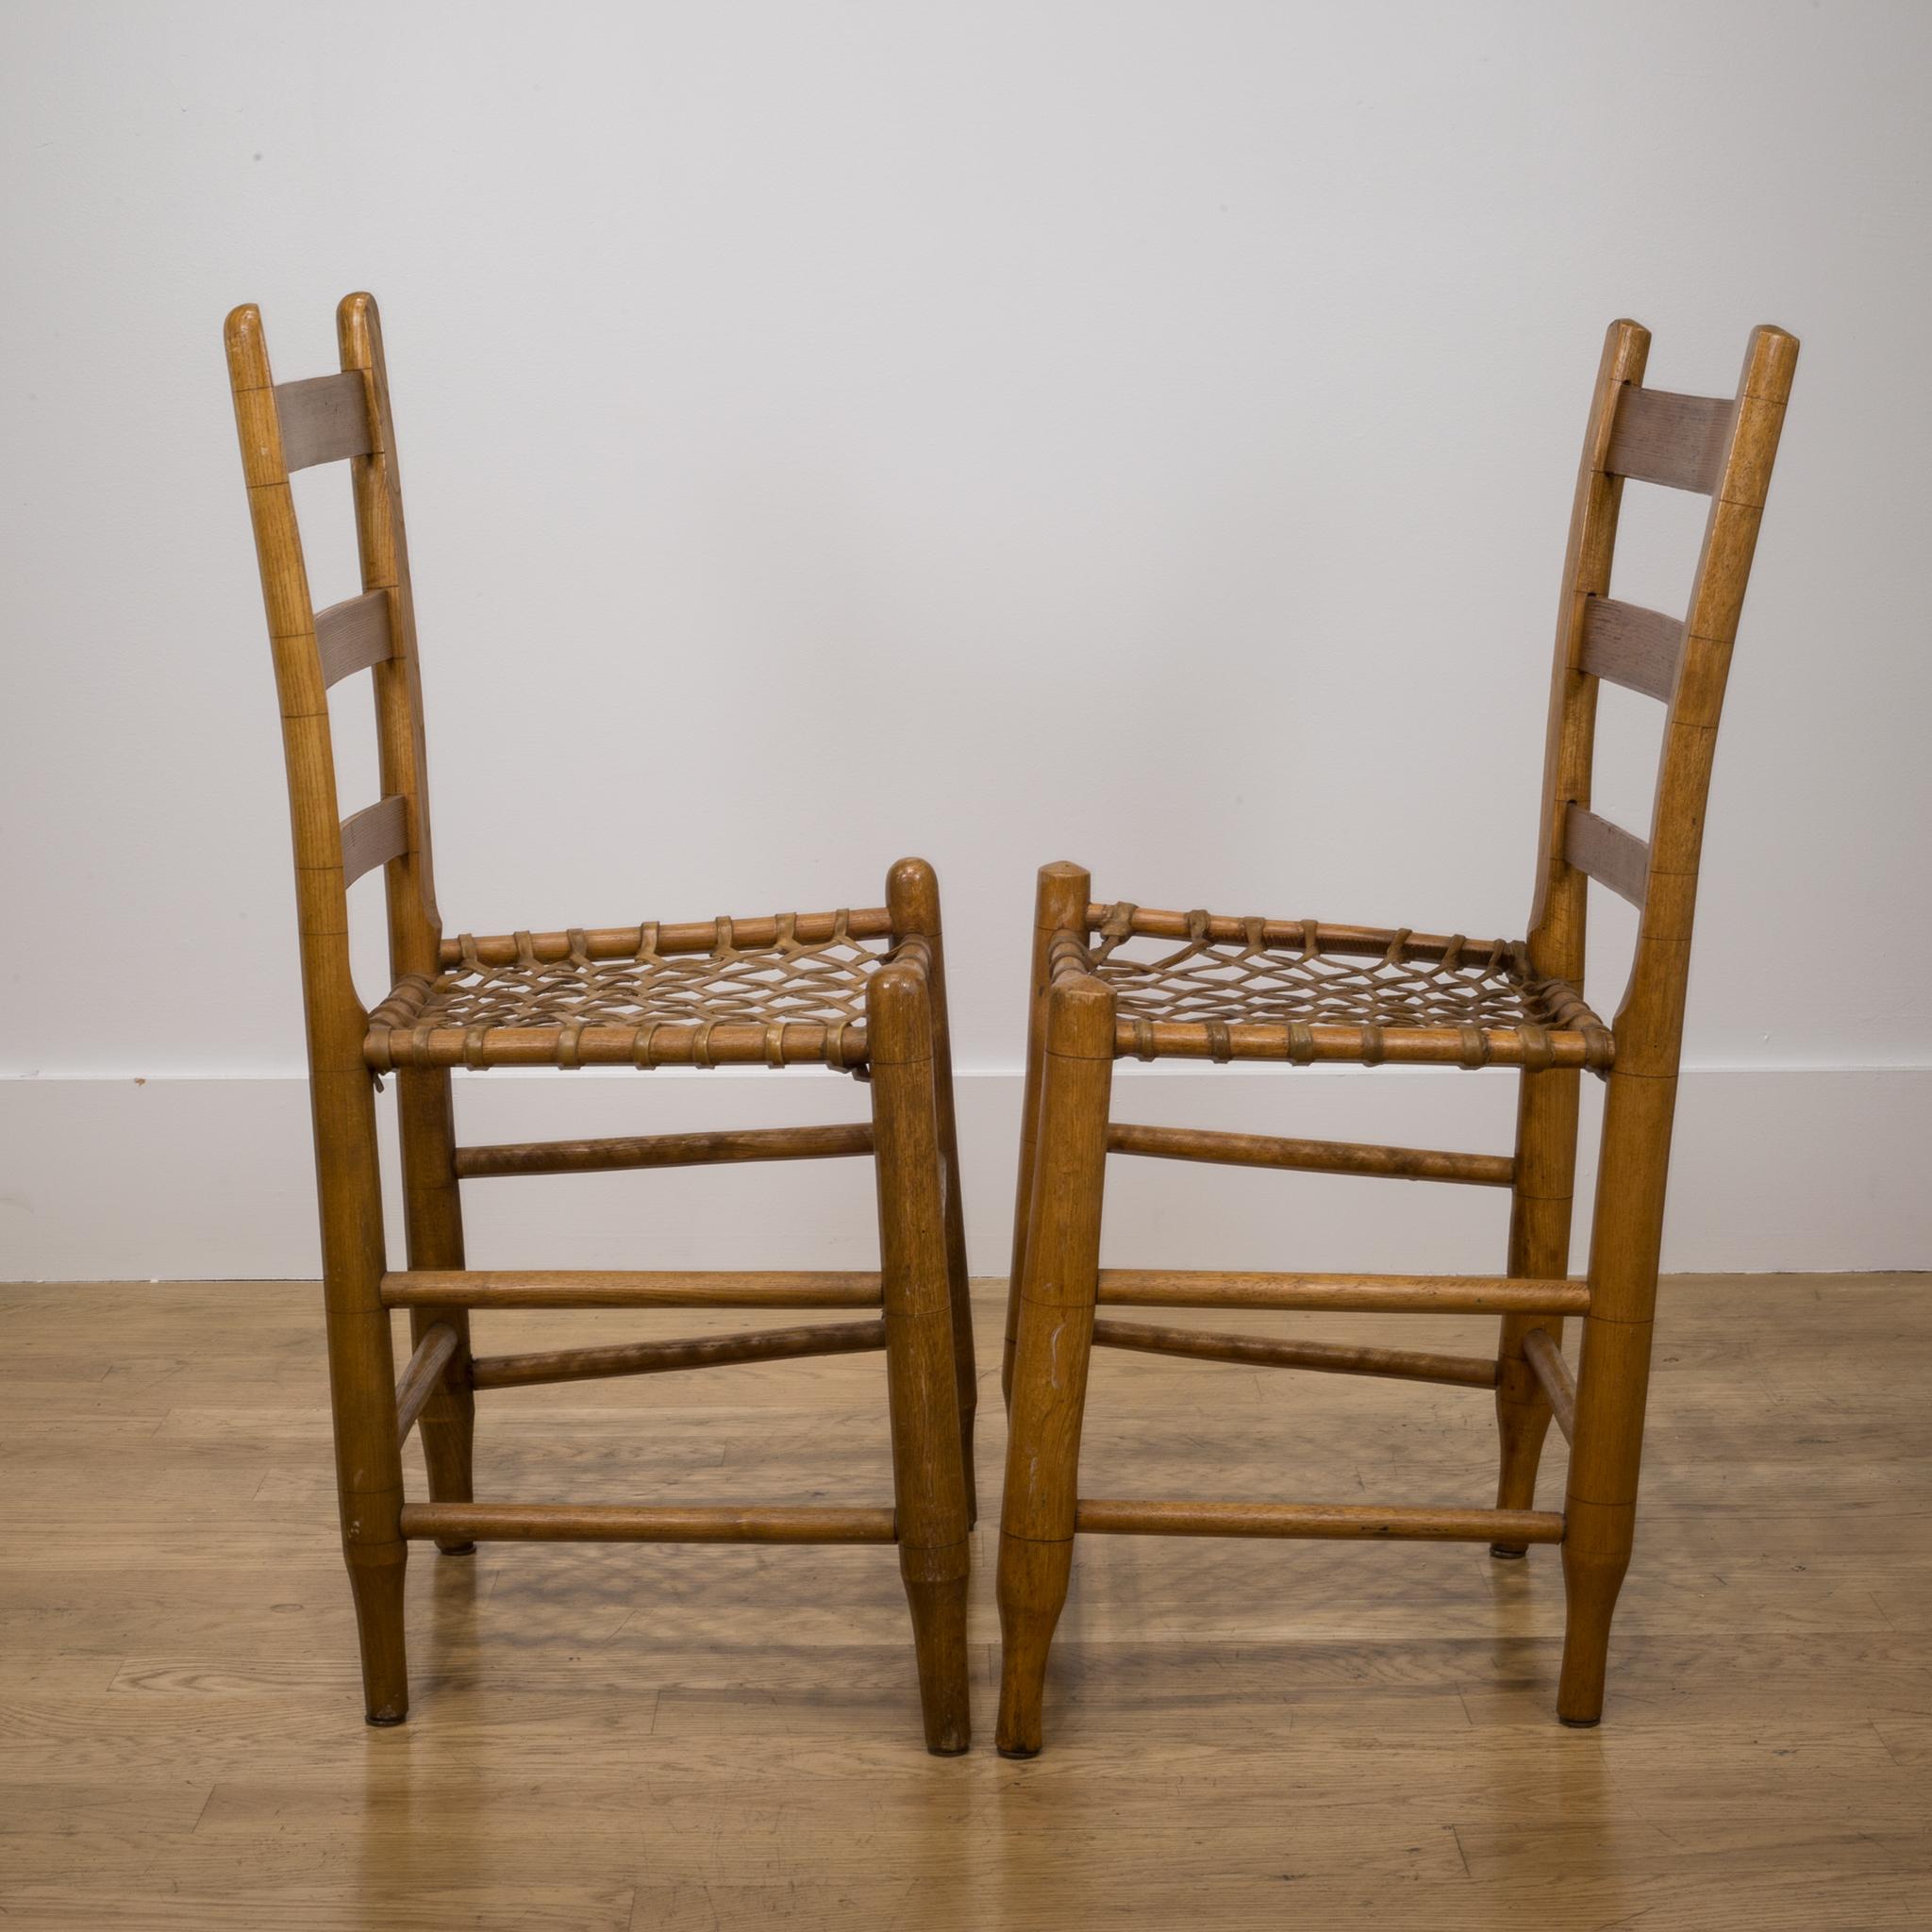 19th Century Rawhide Chairs from Historic Oregon Commune, circa 1856 2